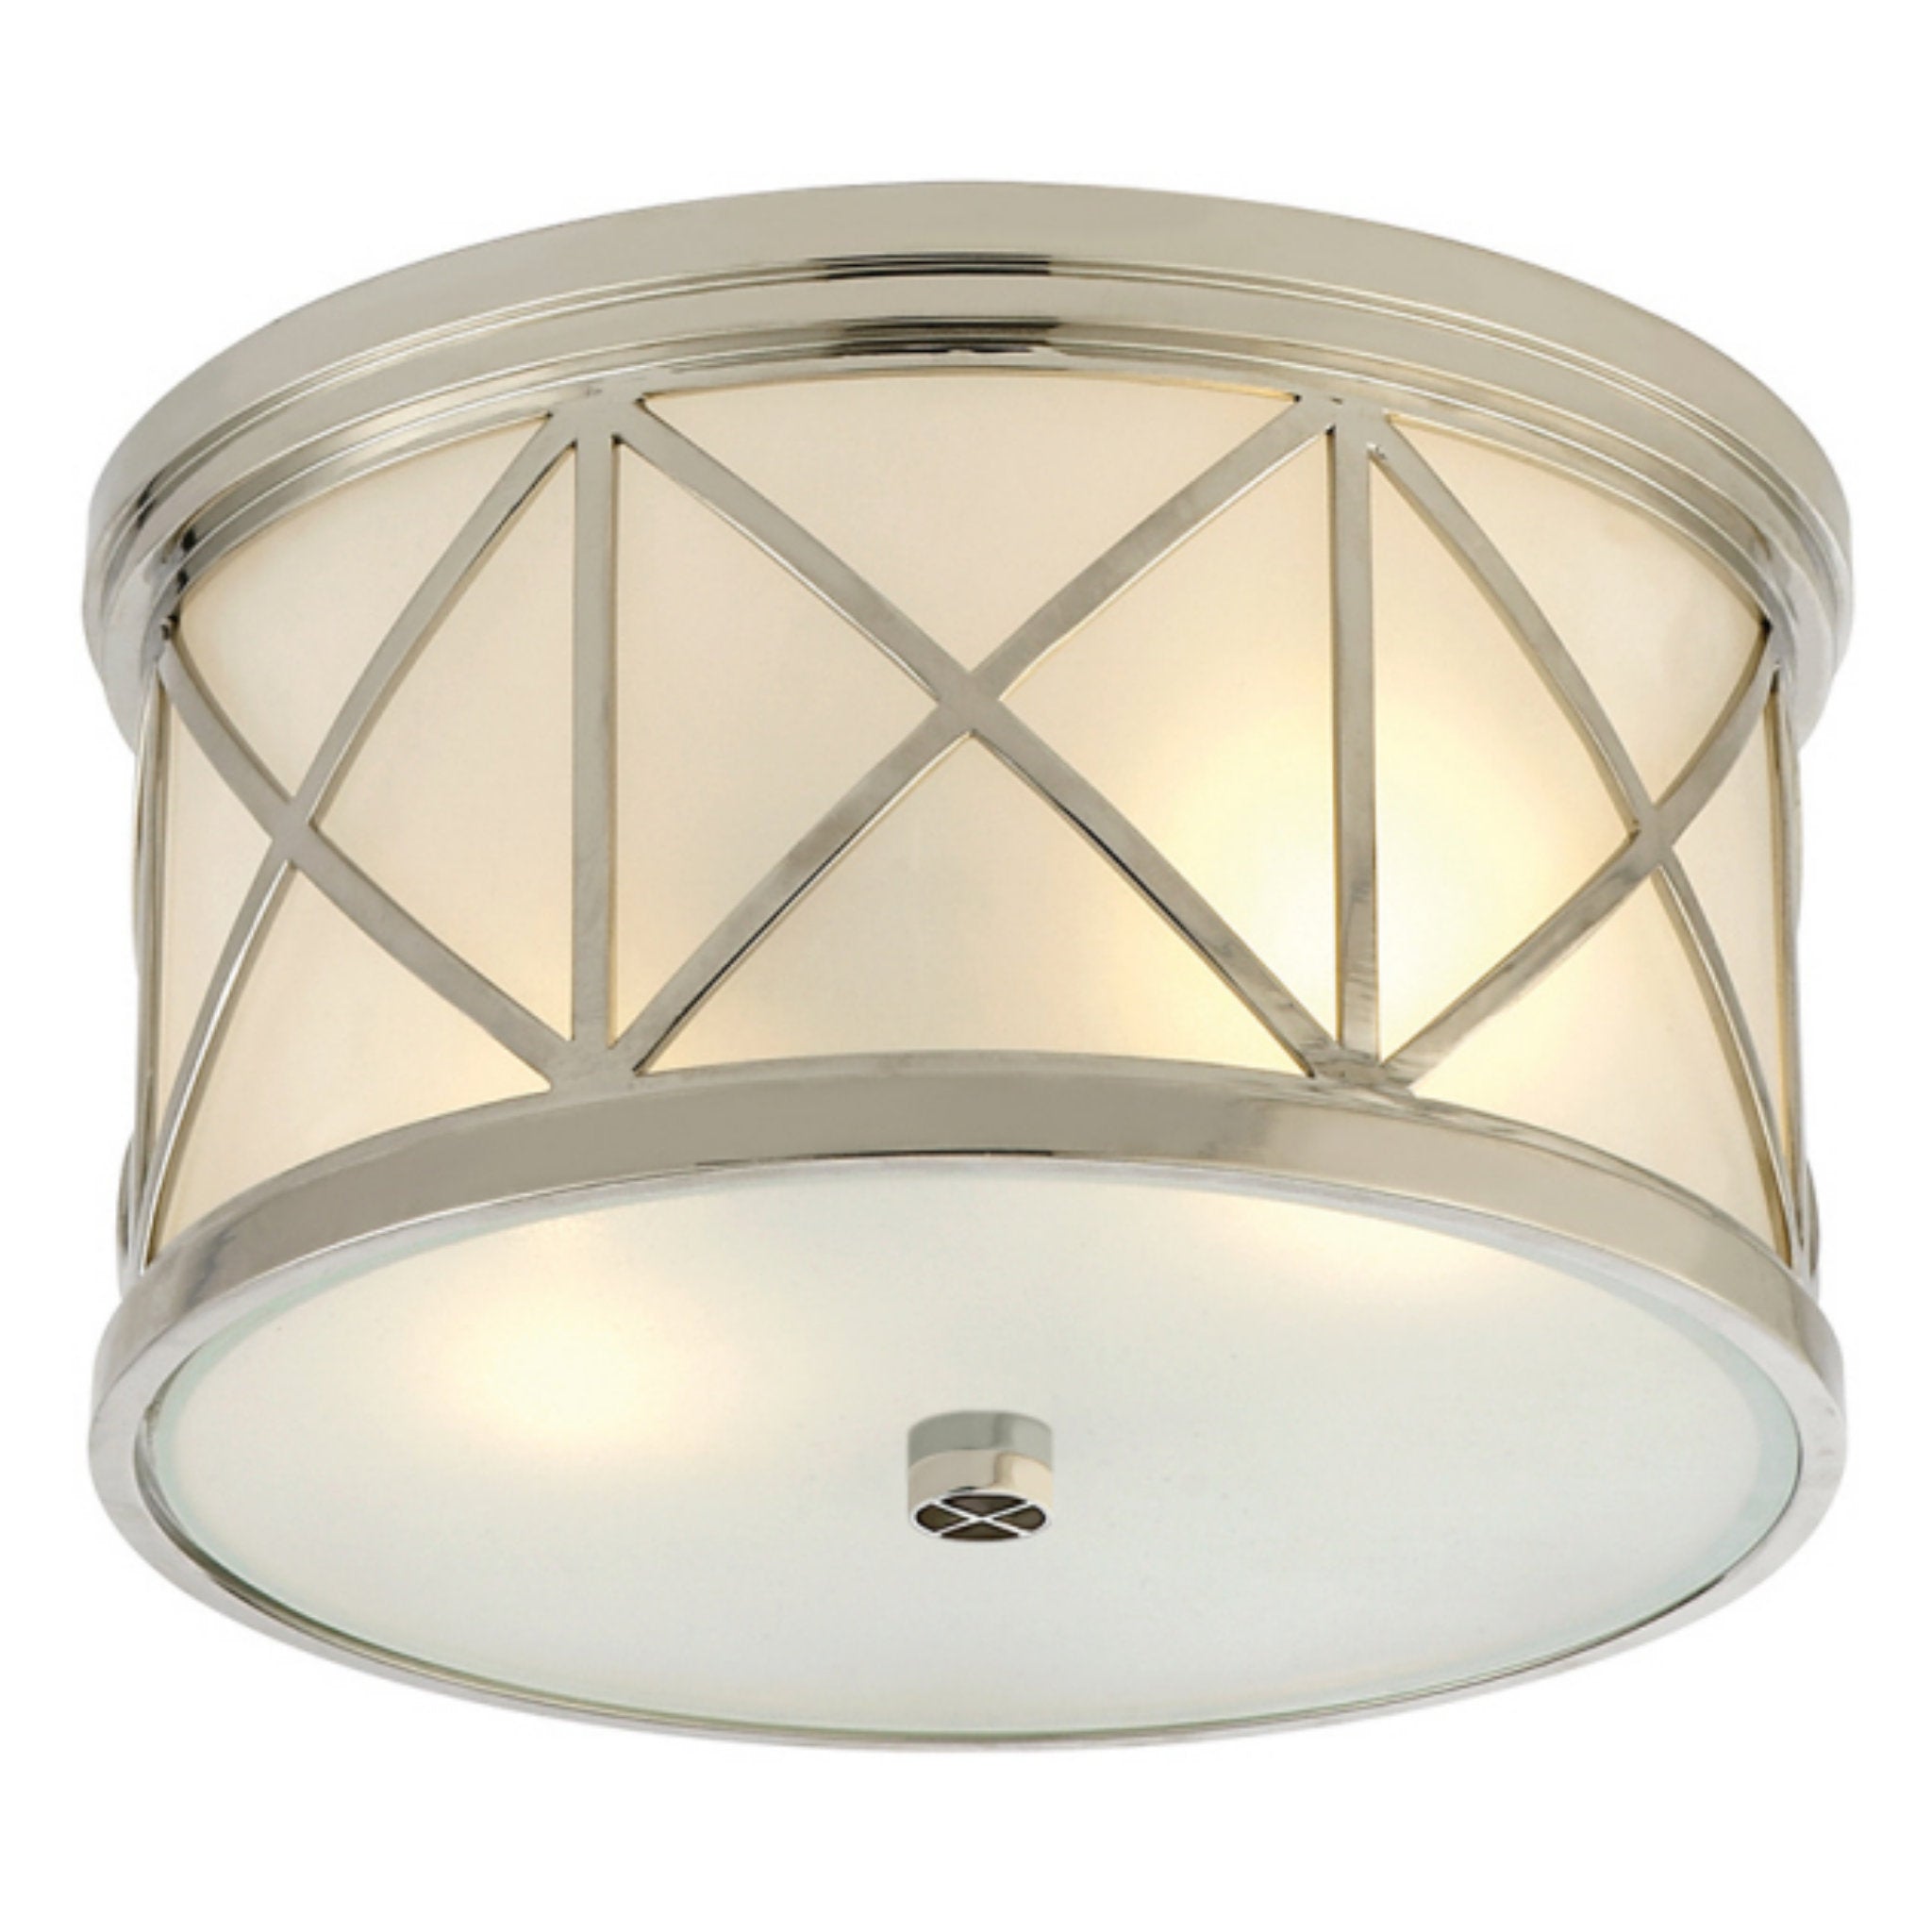 Suzanne Kasler Montpelier Small Flush Mount in Polished Nickel with Frosted Glass